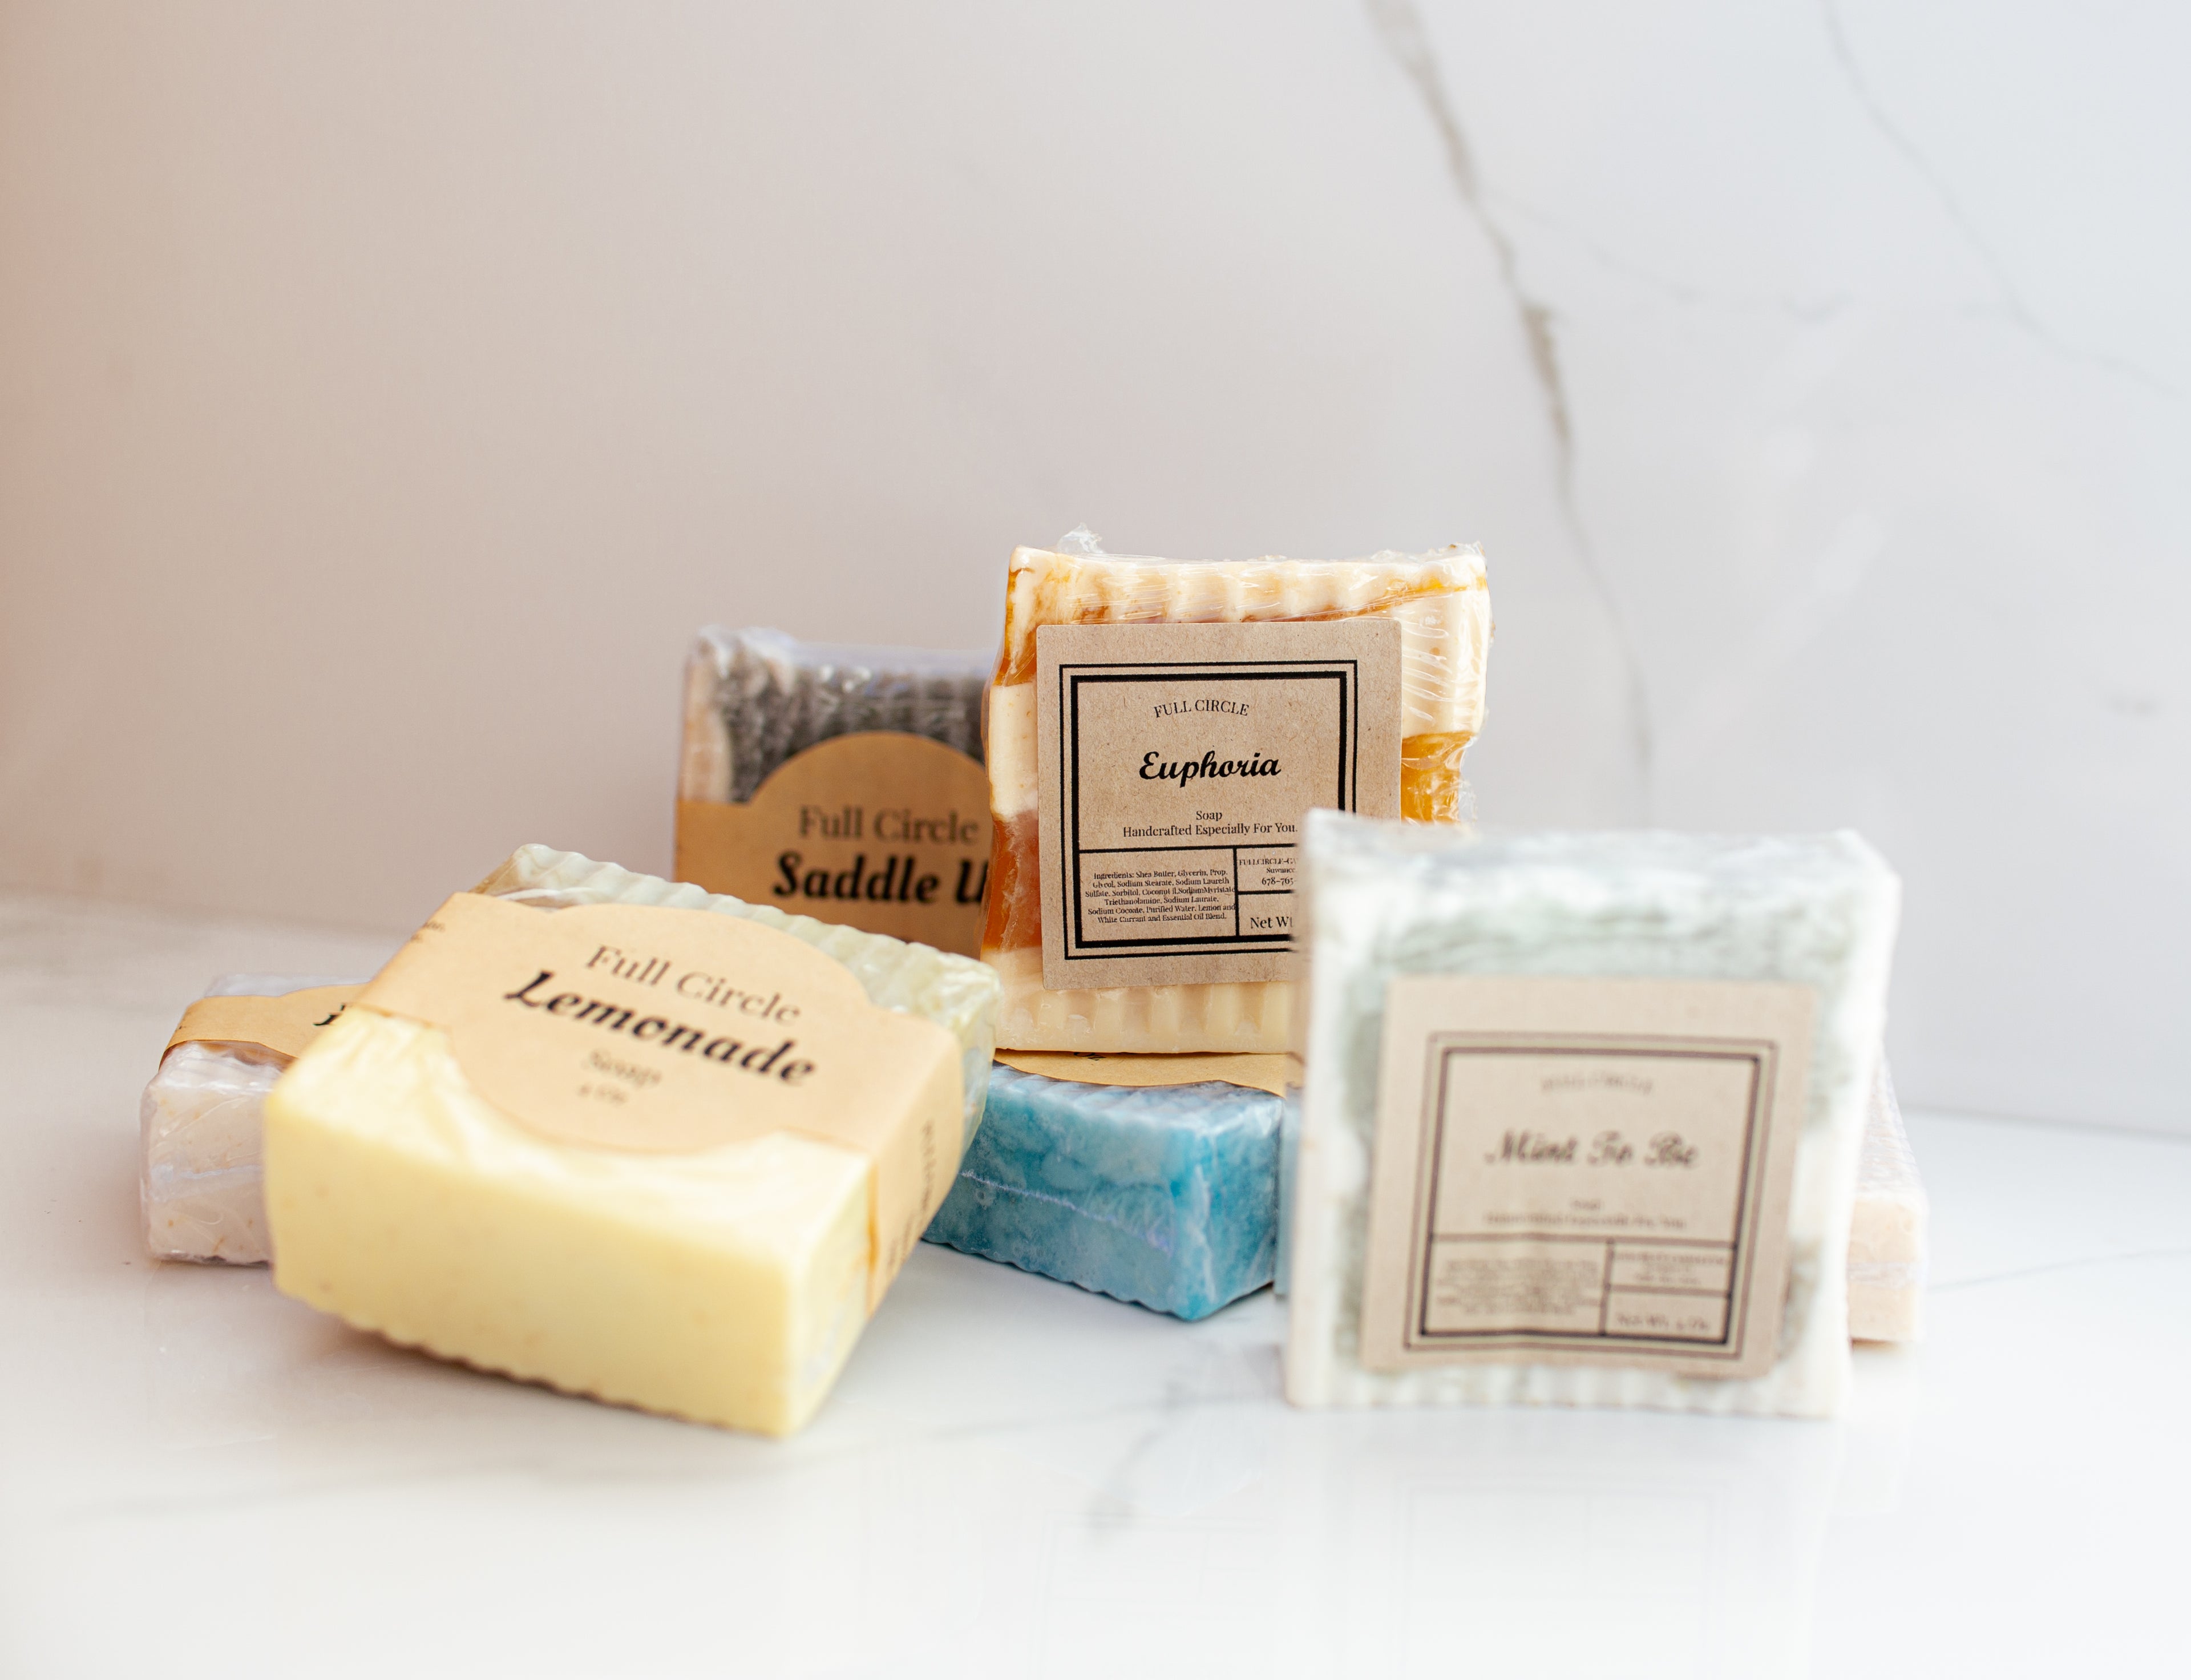 Handmade bar soaps to soothe dry skin